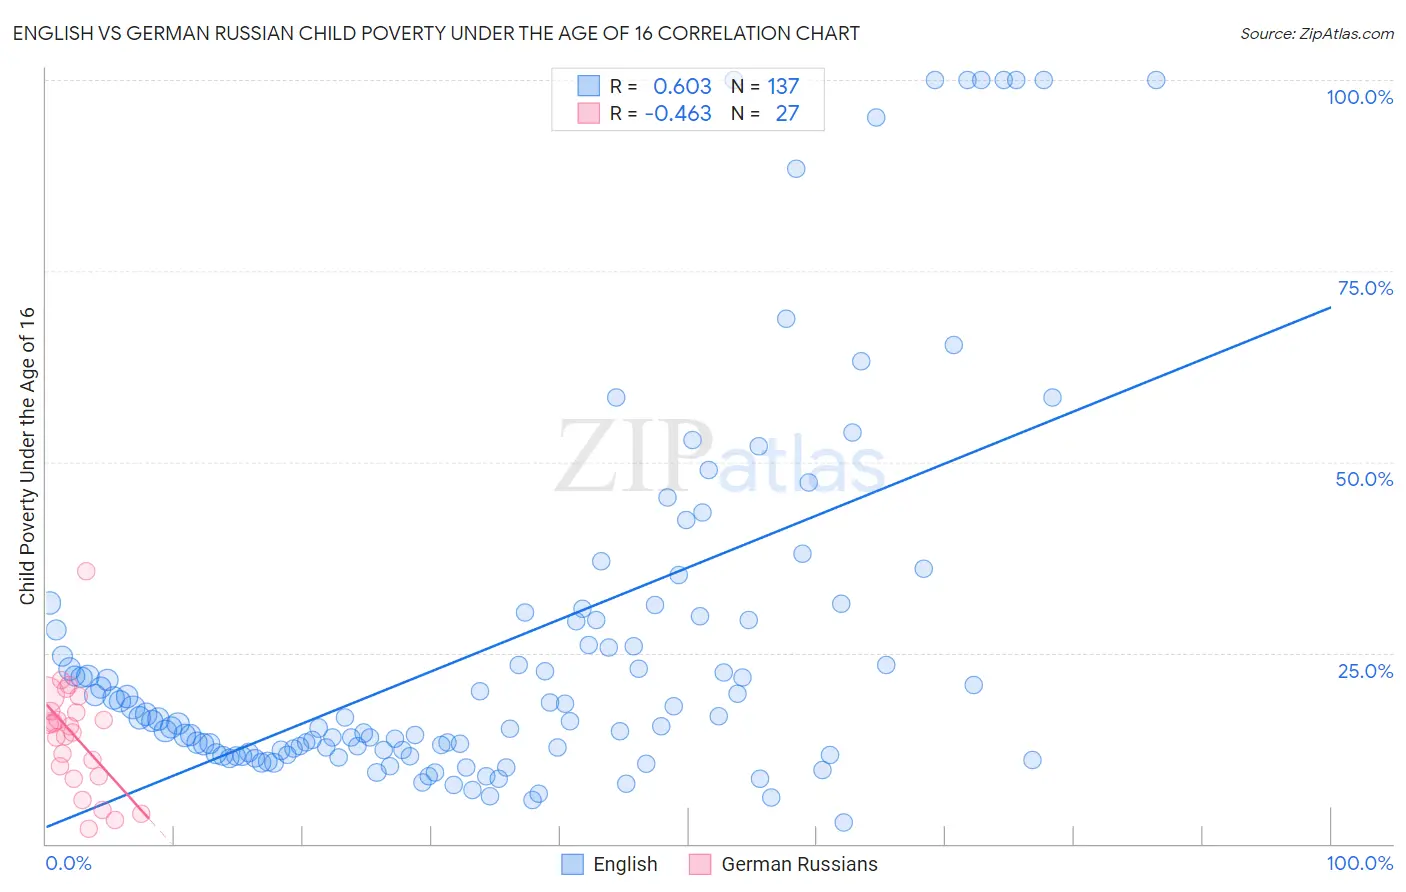 English vs German Russian Child Poverty Under the Age of 16